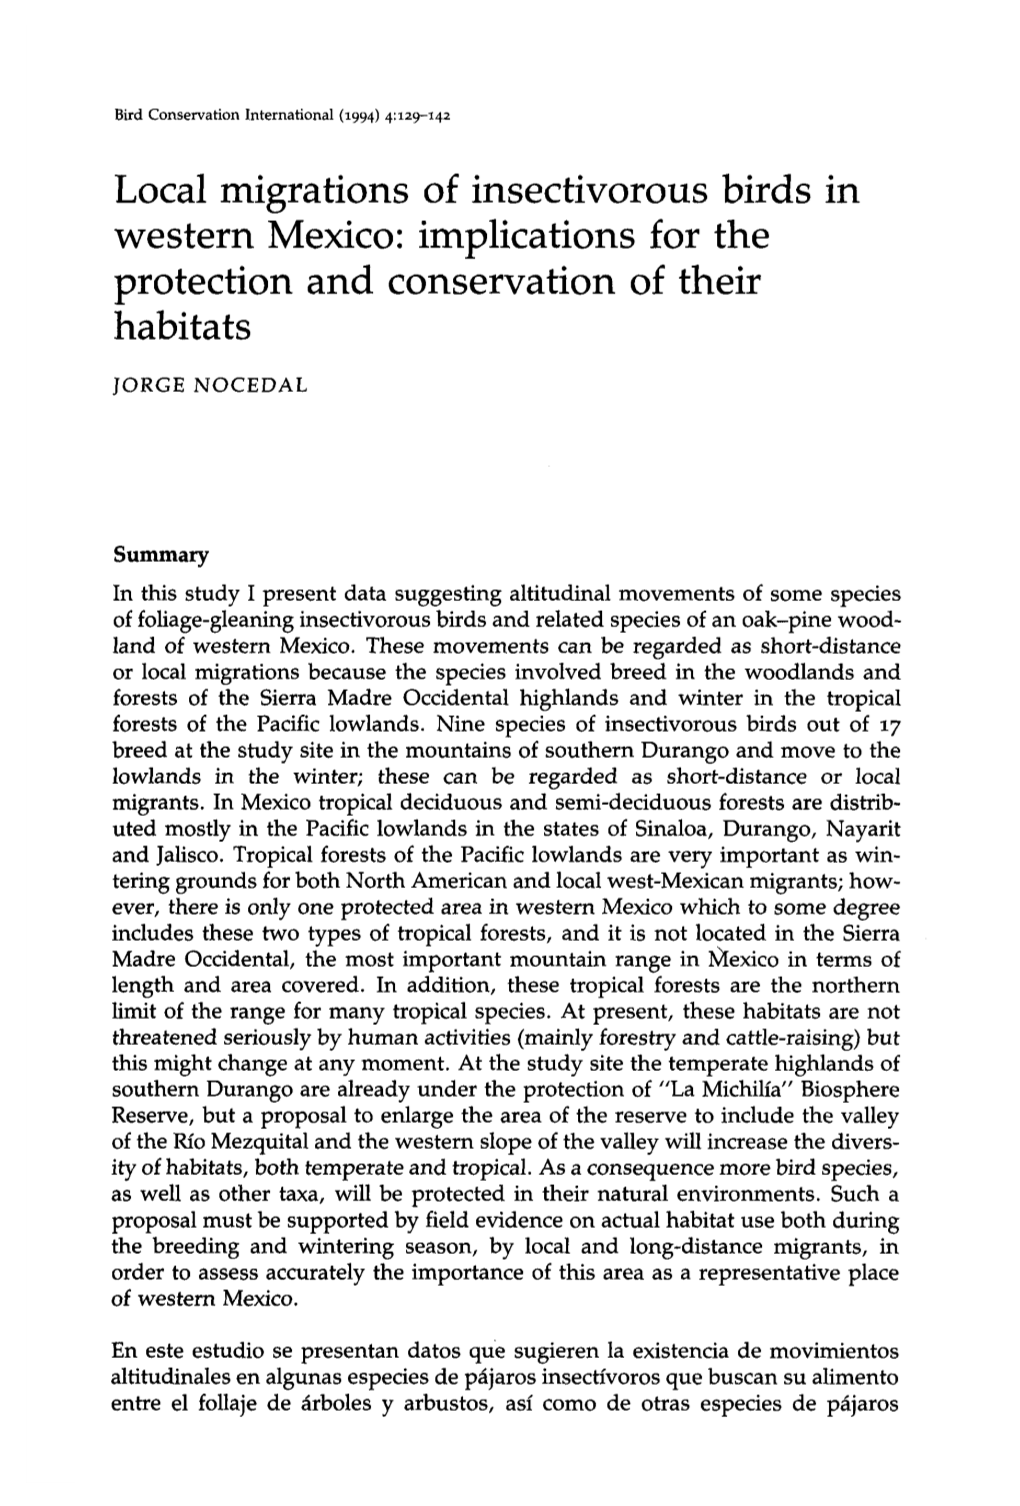 Local Migrations of Insectivorous Birds in Western Mexico: Implications for the Protection and Conservation of Their Habitats